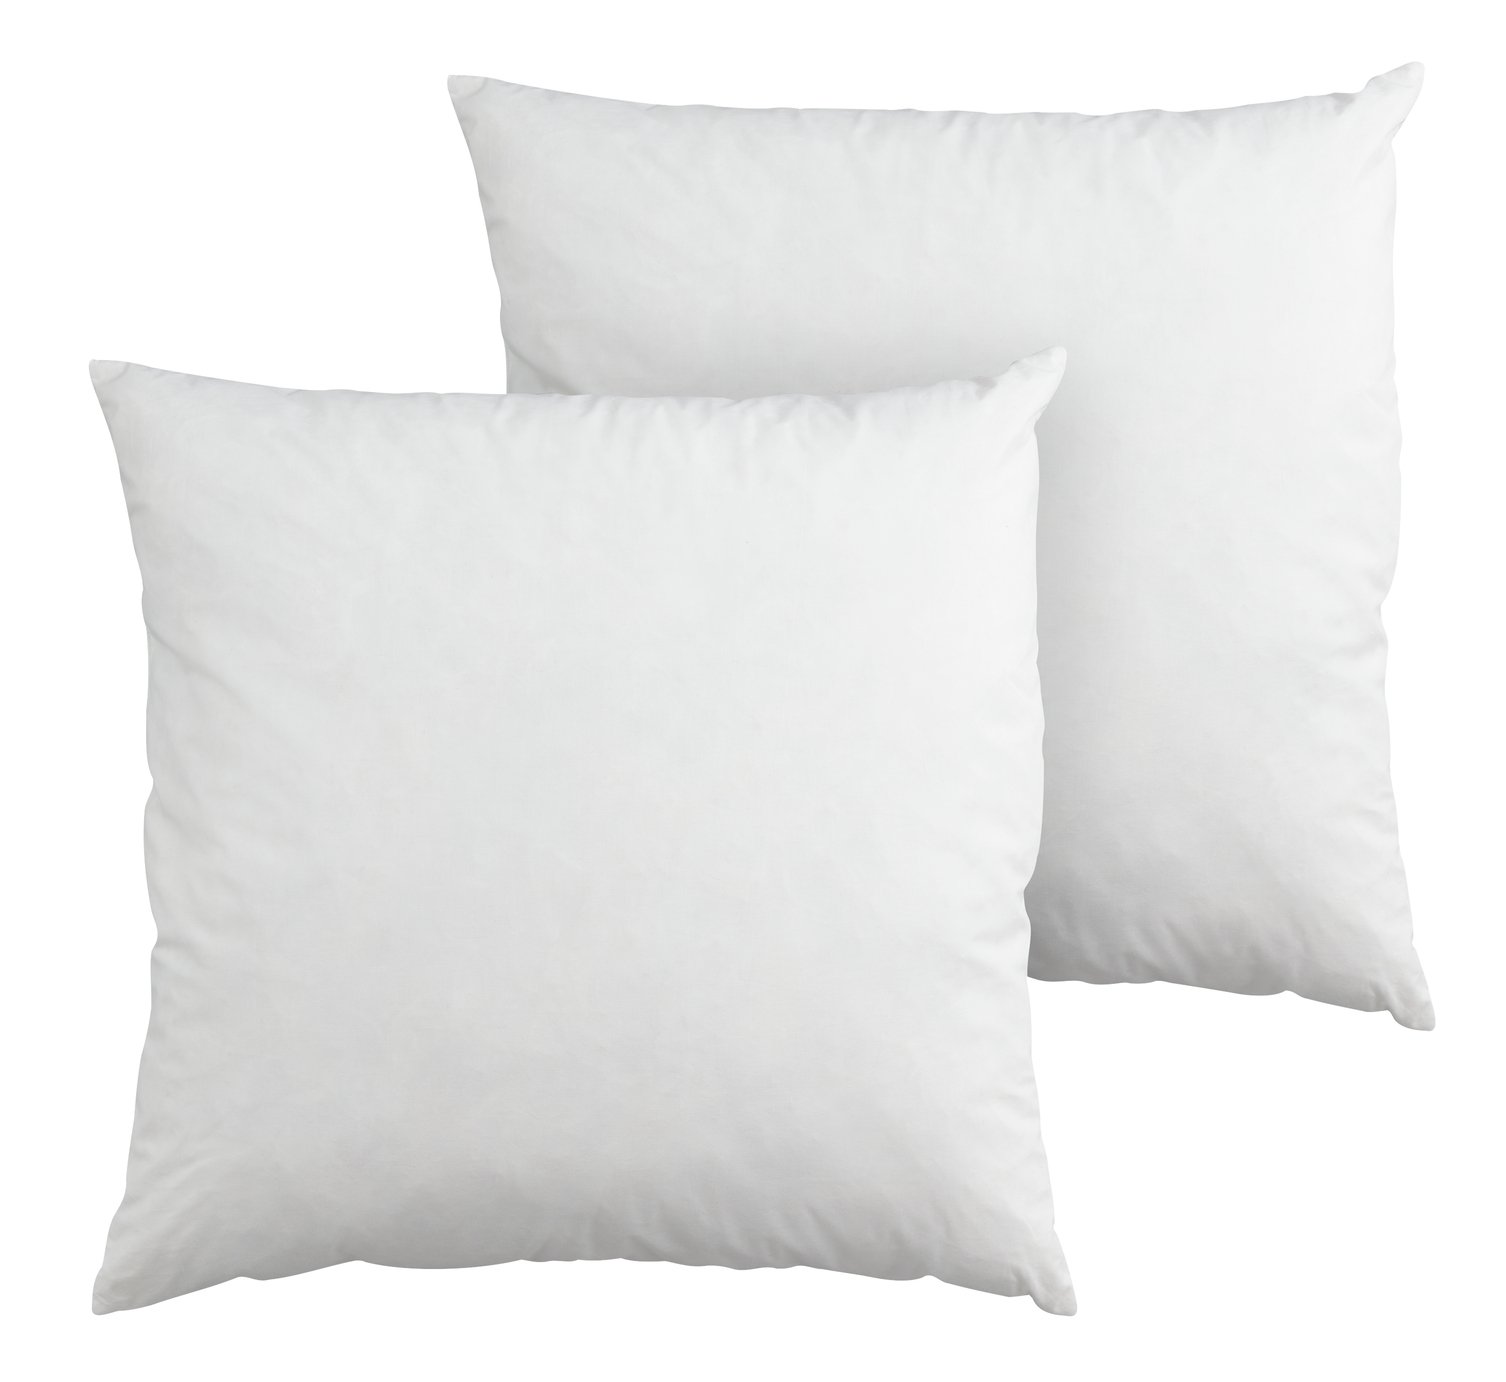 Argos Home Feather Cushion Pads - 2 Pack - White - 50x50cm